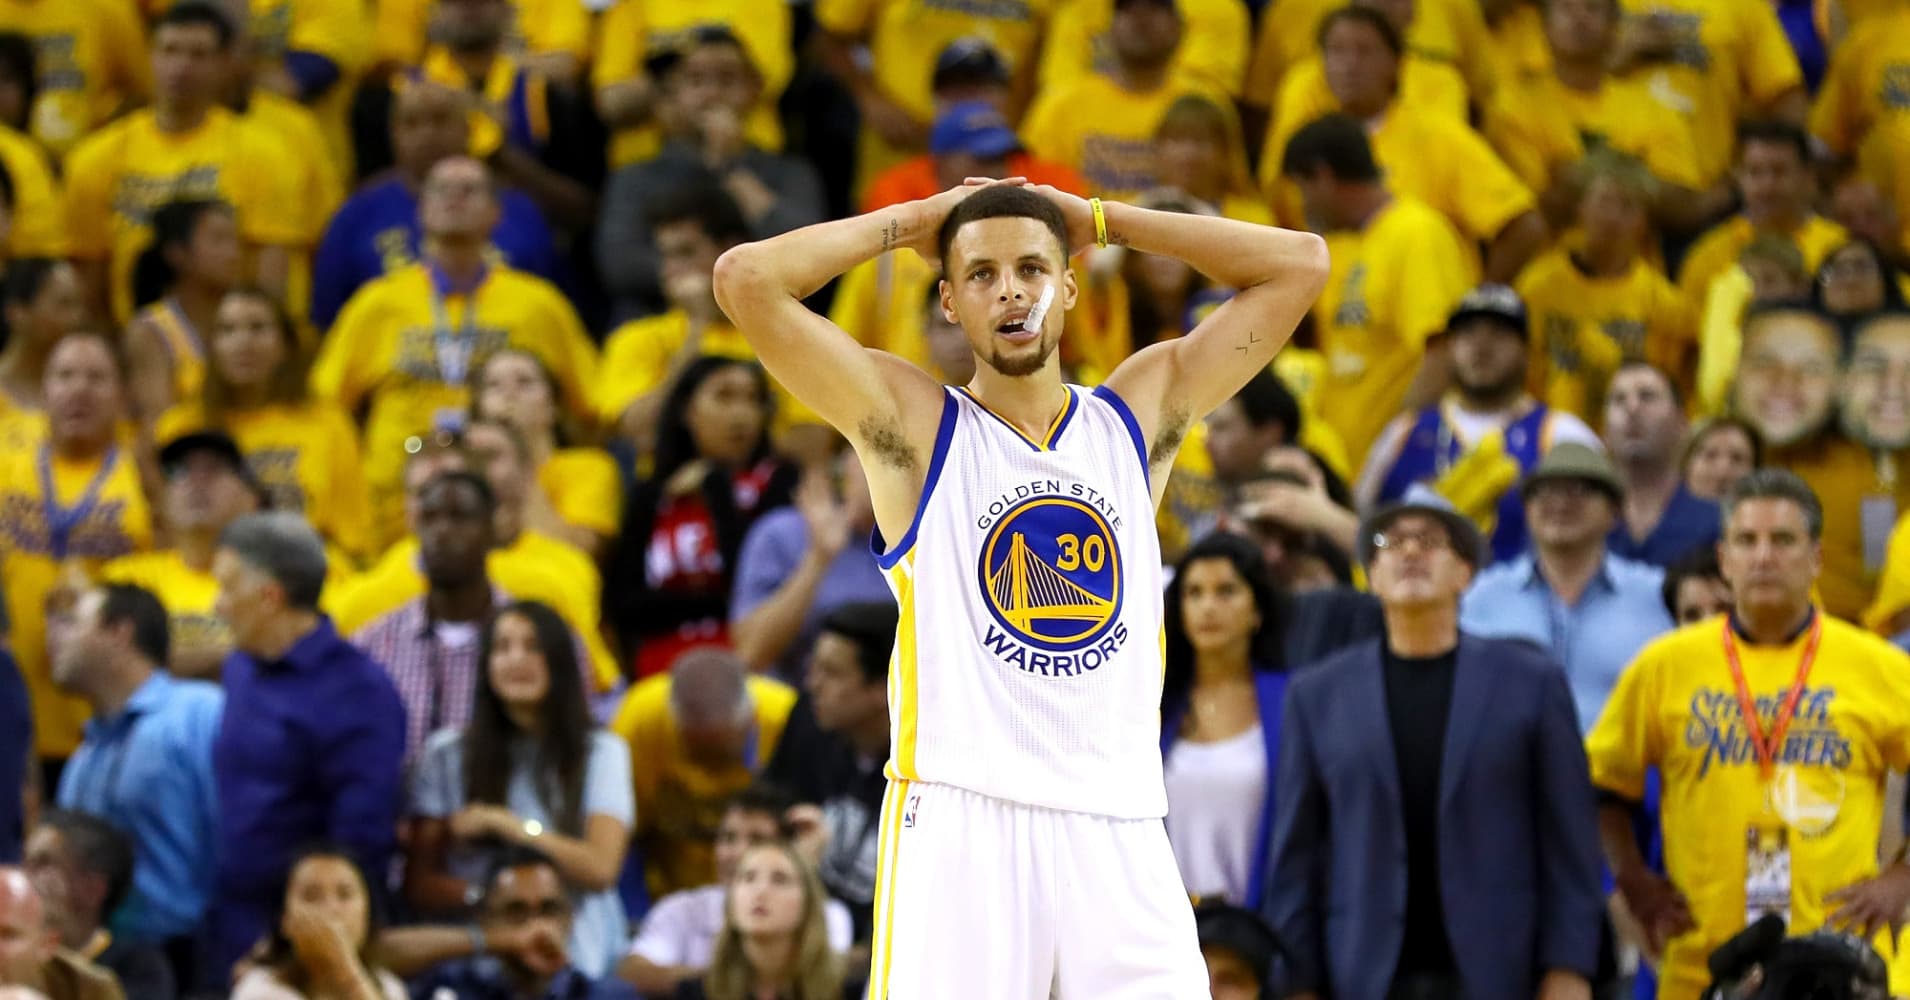 Stephen Curry #30 of the Golden State Warriors reacts after losing 93-89 in Game 7 of the 2016 NBA Finals against the Cleveland Cavaliers.